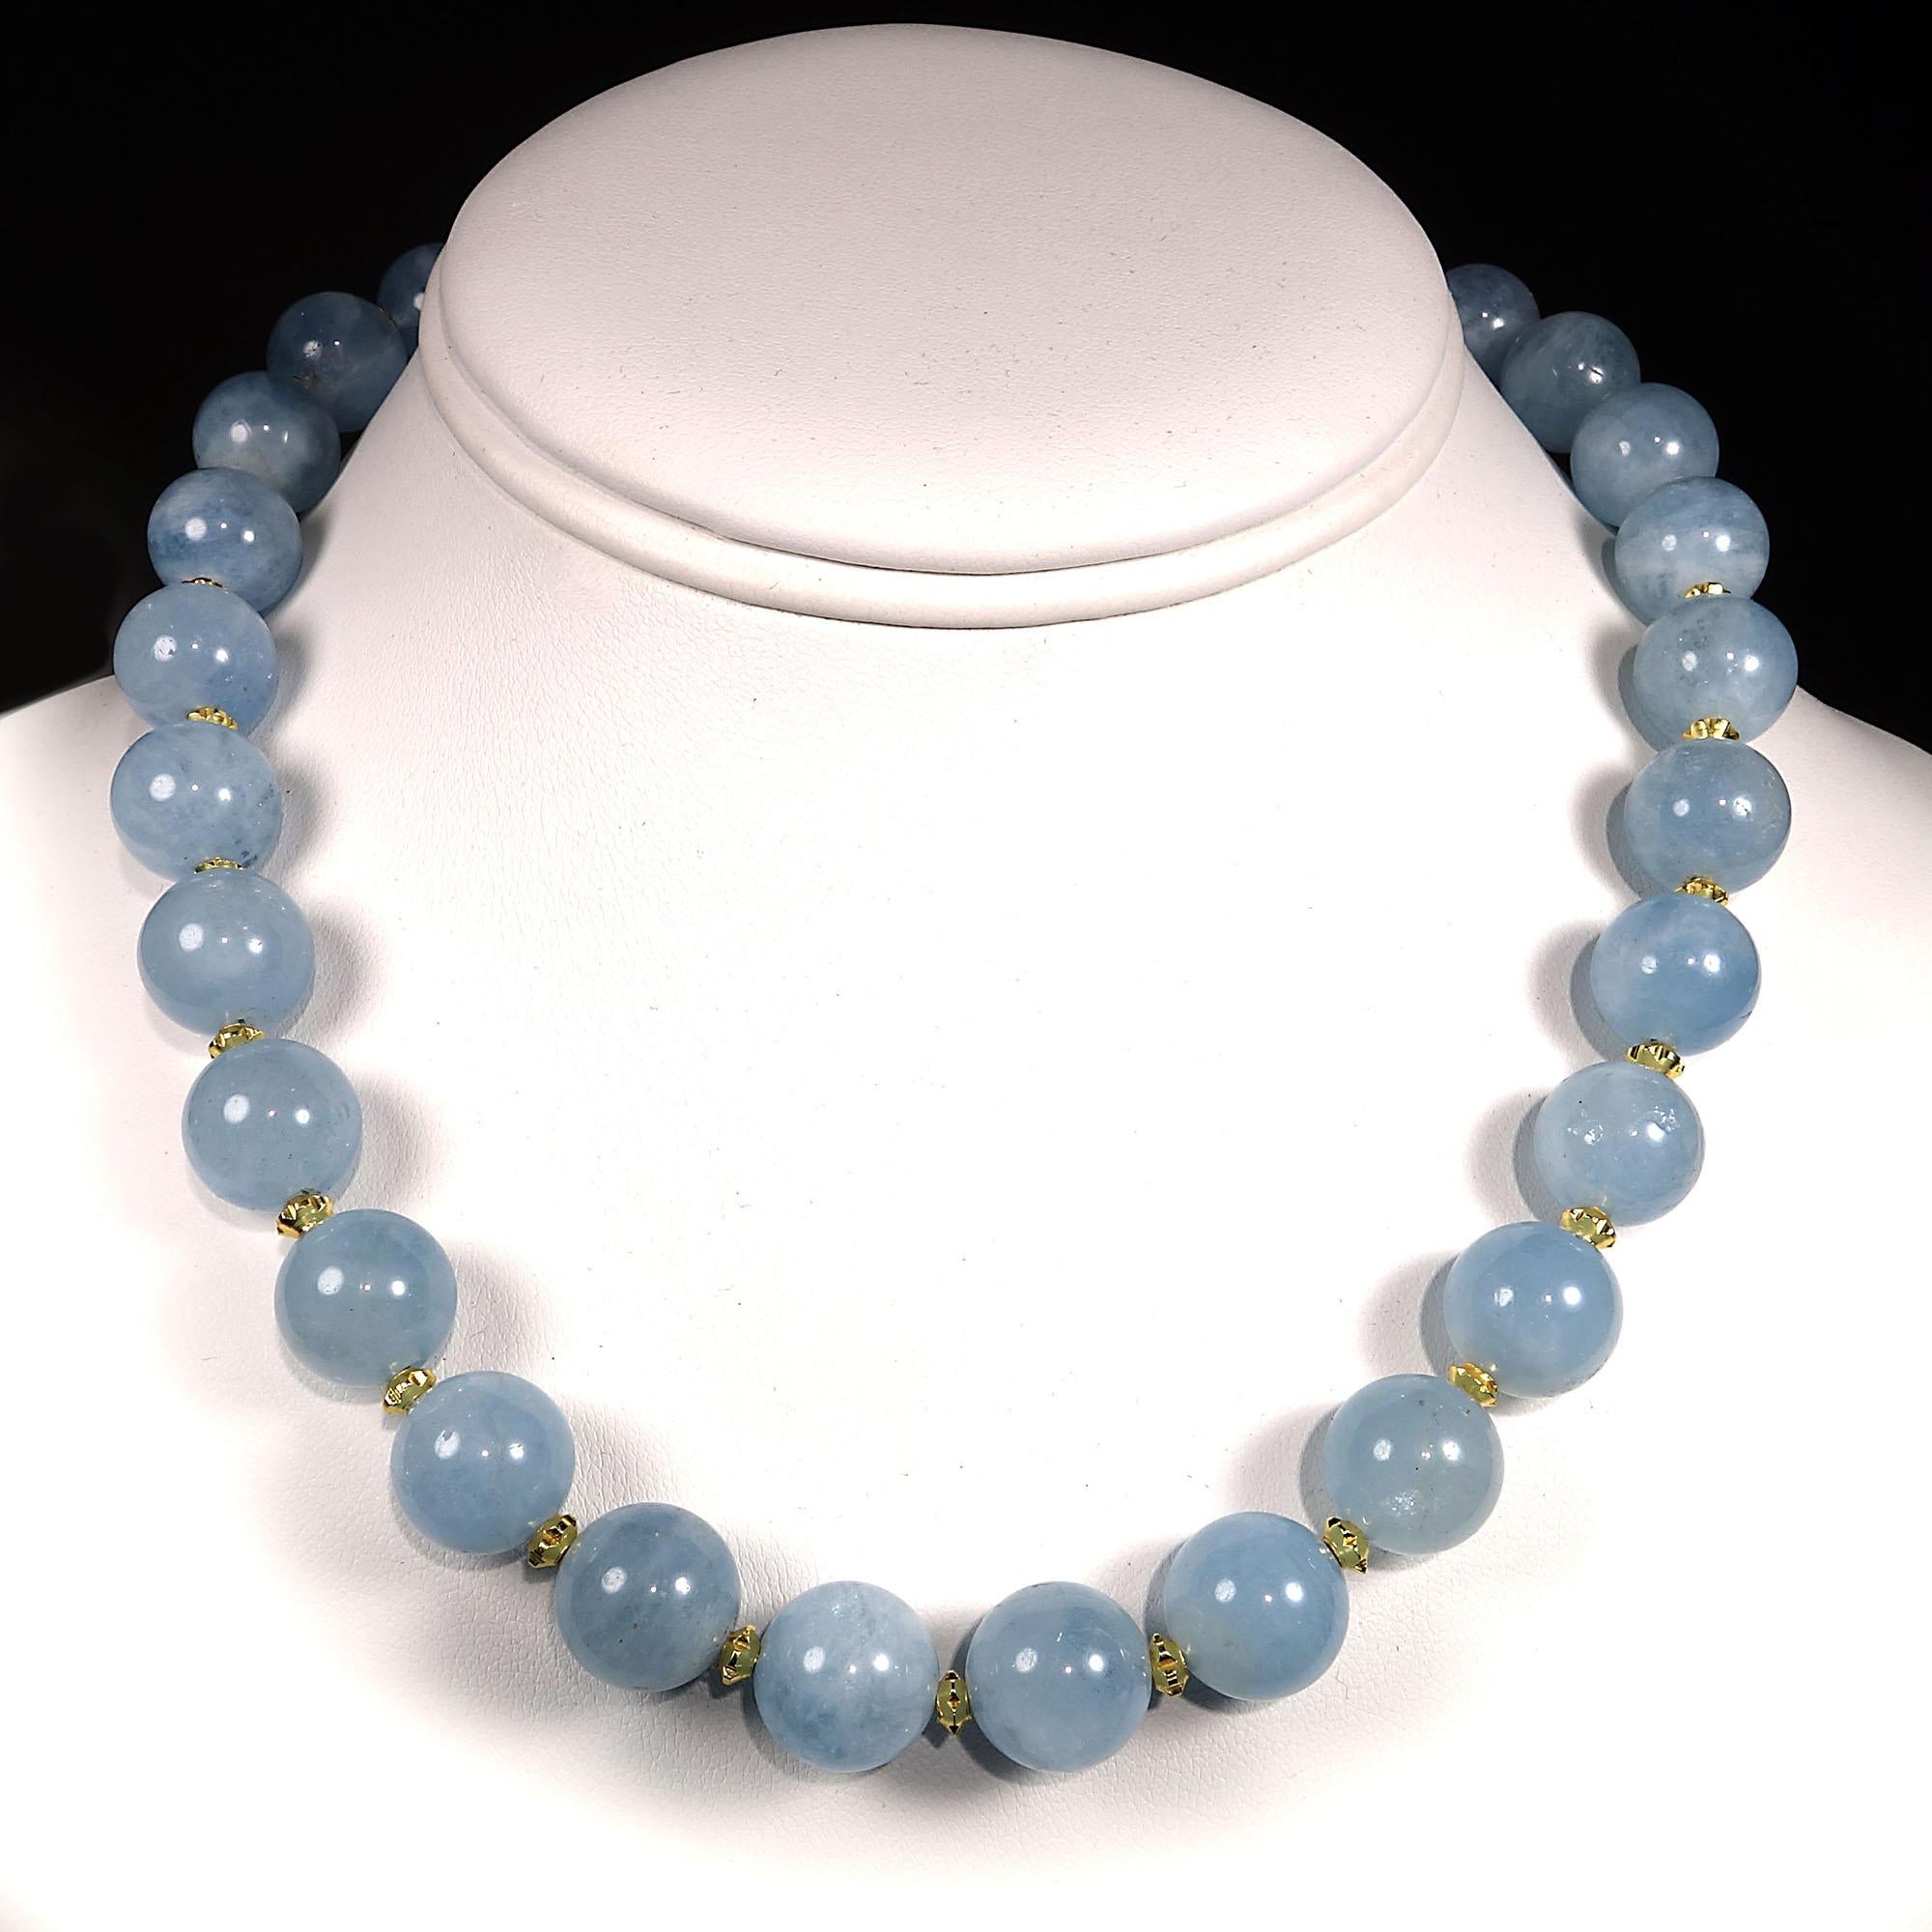 Gemjunky Translucent Aquamarine Choker Necklace with Gold Accents 5